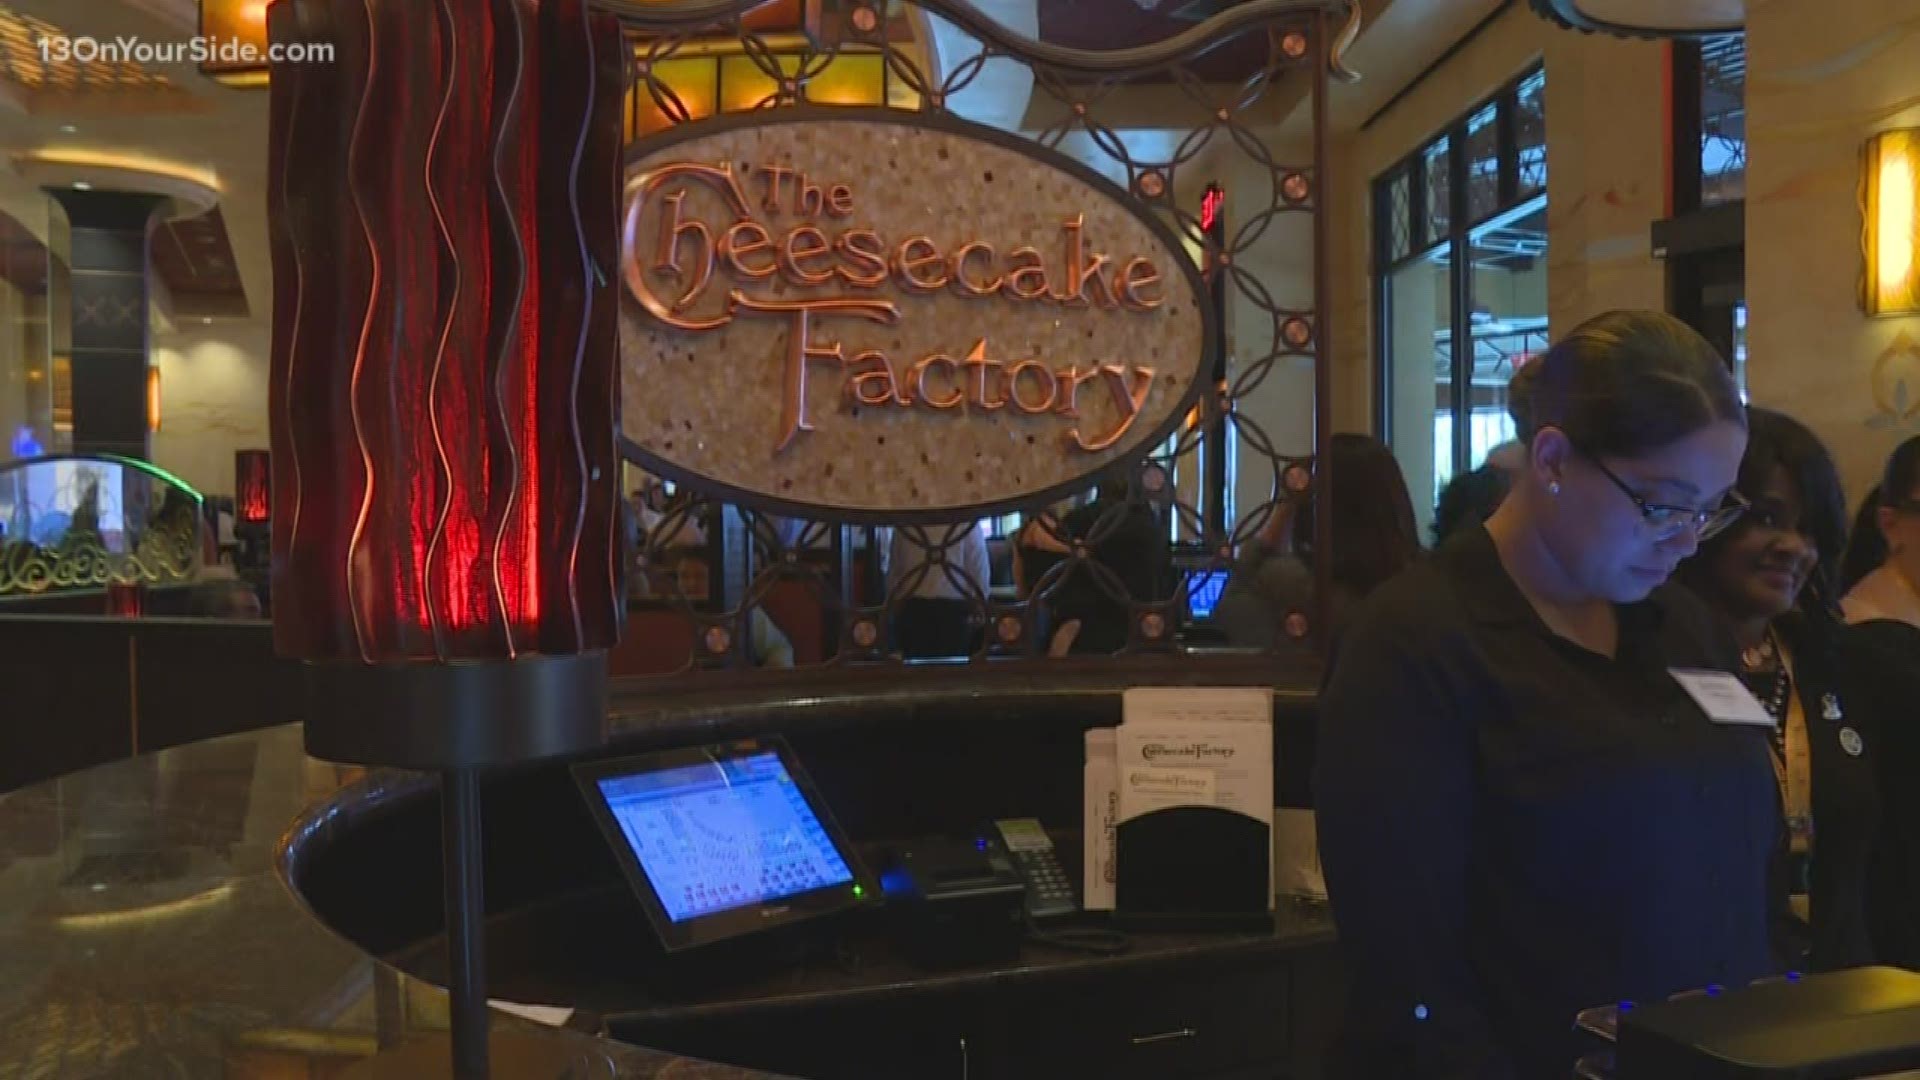 Eager cheesecake-lovers have already lined up in anticipation of the Cheesecake Factory's new Kentwood location opening Tuesday, Nov. 5.